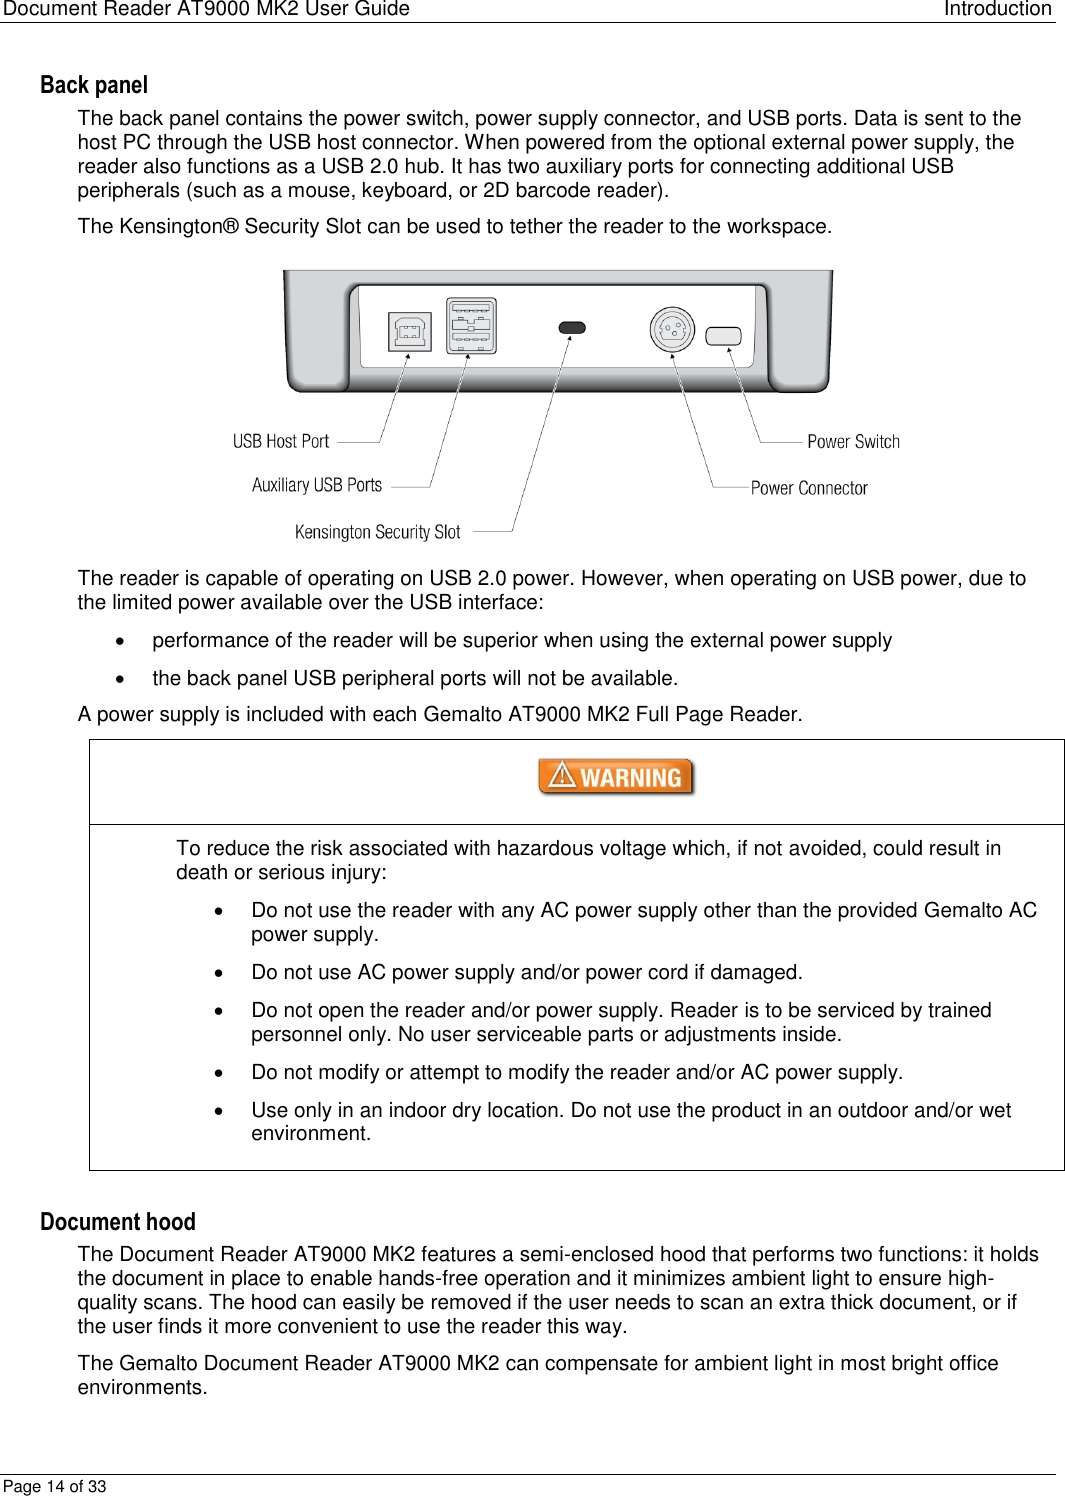 Document Reader AT9000 MK2 User Guide Introduction Page 14 of 33 Back panel The back panel contains the power switch, power supply connector, and USB ports. Data is sent to the host PC through the USB host connector. When powered from the optional external power supply, the reader also functions as a USB 2.0 hub. It has two auxiliary ports for connecting additional USB peripherals (such as a mouse, keyboard, or 2D barcode reader). The Kensington® Security Slot can be used to tether the reader to the workspace.  The reader is capable of operating on USB 2.0 power. However, when operating on USB power, due to the limited power available over the USB interface:   performance of the reader will be superior when using the external power supply   the back panel USB peripheral ports will not be available. A power supply is included with each Gemalto AT9000 MK2 Full Page Reader.  To reduce the risk associated with hazardous voltage which, if not avoided, could result in death or serious injury:   Do not use the reader with any AC power supply other than the provided Gemalto AC power supply.   Do not use AC power supply and/or power cord if damaged.   Do not open the reader and/or power supply. Reader is to be serviced by trained personnel only. No user serviceable parts or adjustments inside.   Do not modify or attempt to modify the reader and/or AC power supply.   Use only in an indoor dry location. Do not use the product in an outdoor and/or wet environment.  Document hood The Document Reader AT9000 MK2 features a semi-enclosed hood that performs two functions: it holds the document in place to enable hands-free operation and it minimizes ambient light to ensure high-quality scans. The hood can easily be removed if the user needs to scan an extra thick document, or if the user finds it more convenient to use the reader this way.  The Gemalto Document Reader AT9000 MK2 can compensate for ambient light in most bright office environments. 